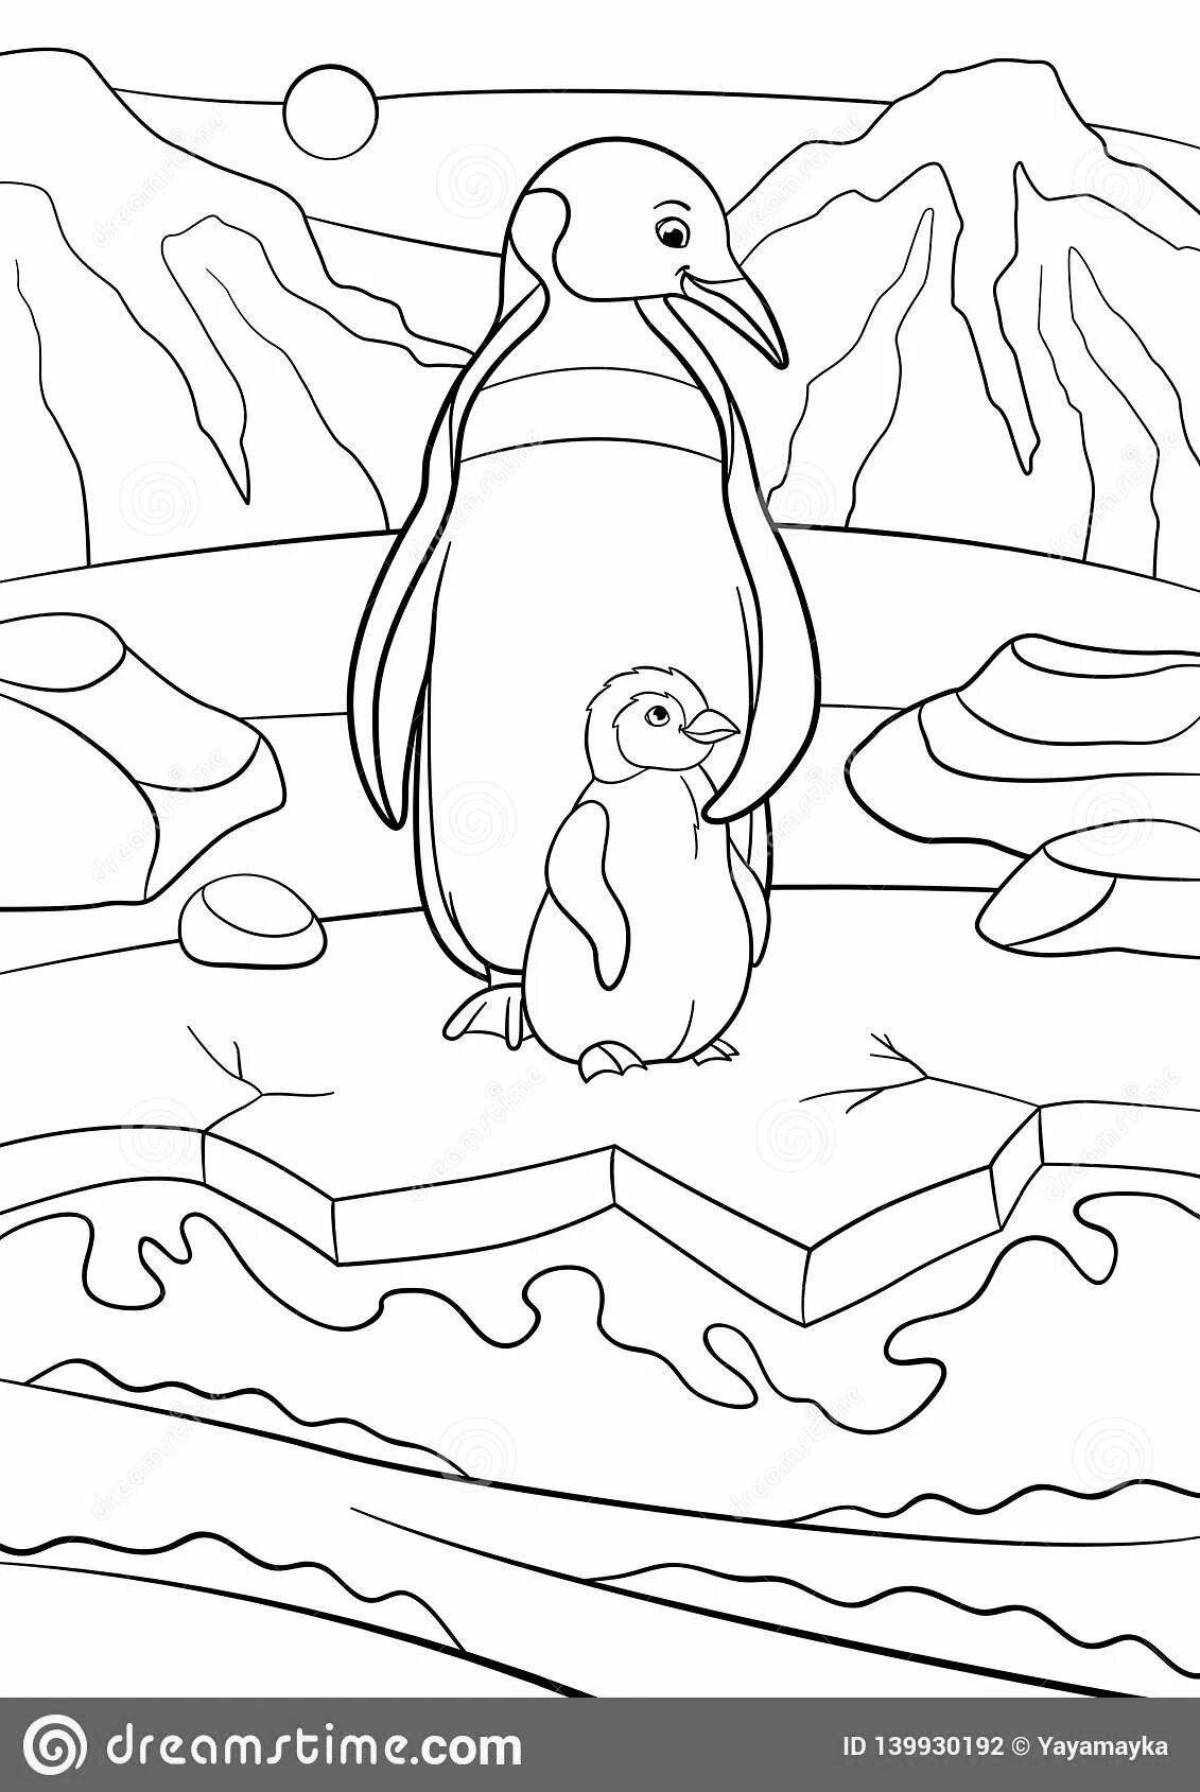 Antarctica live coloring for children 6-7 years old